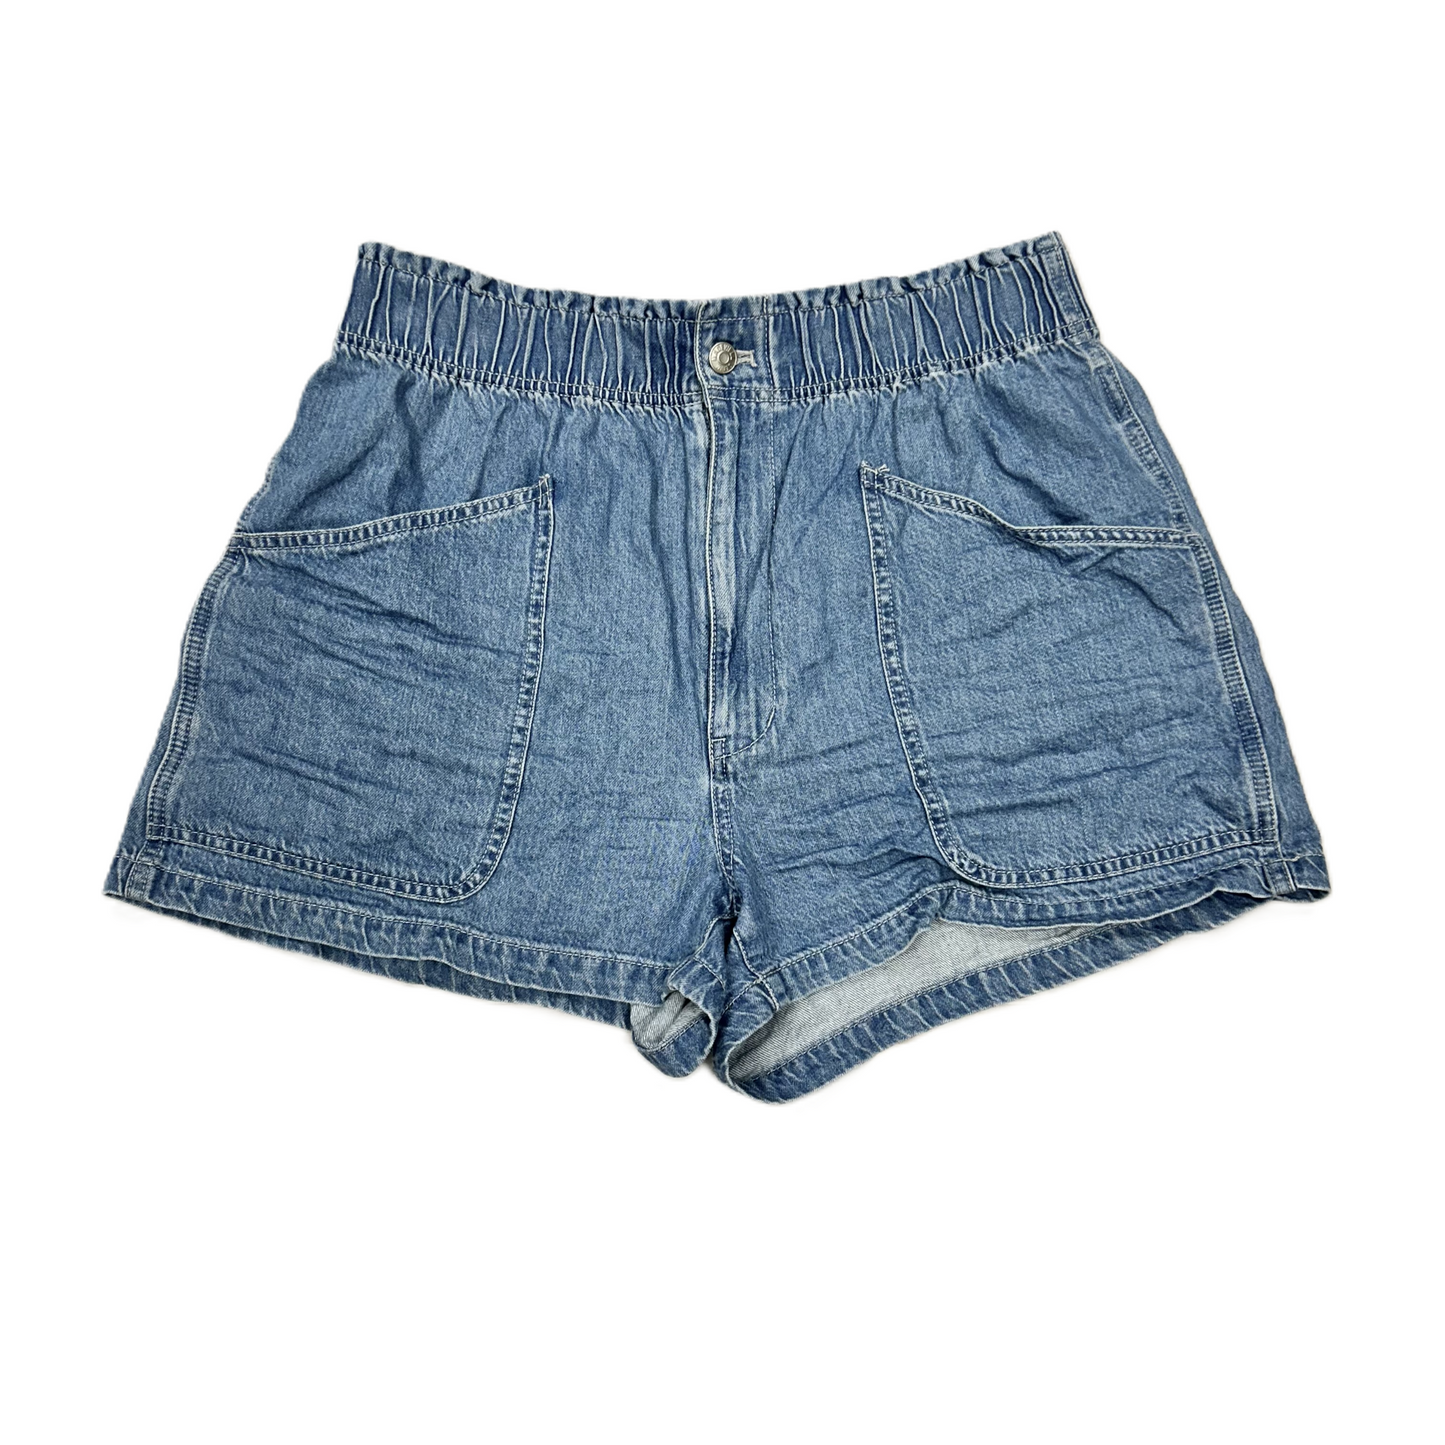 Blue Denim Shorts By Madewell, Size: 10